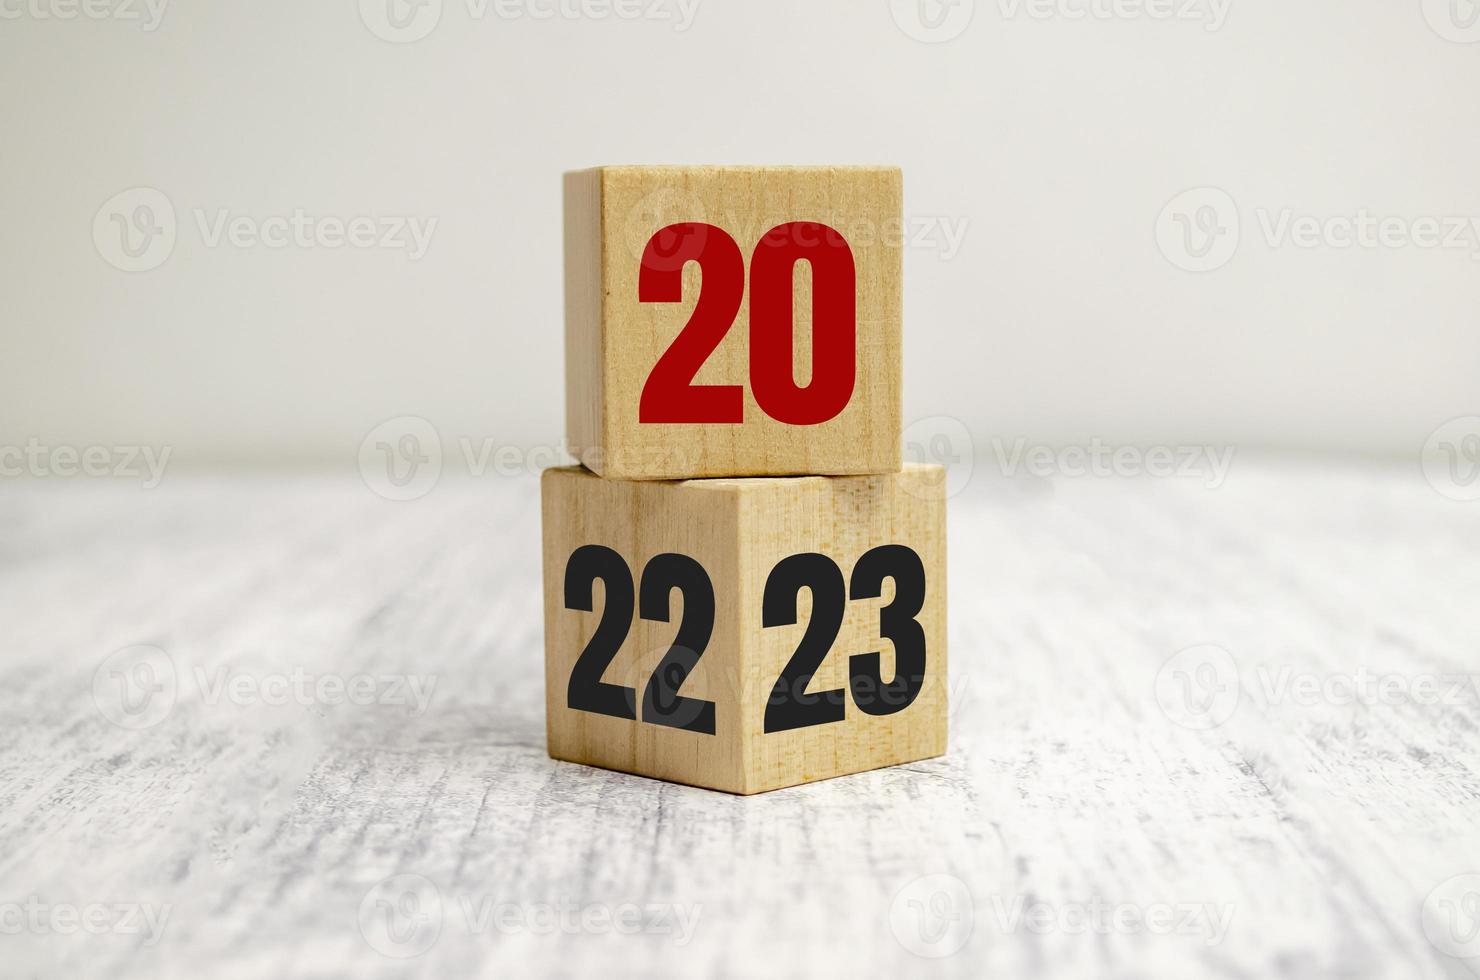 Wooden block cube flipping between 2022 to 2023 for change and preparation merry Christmas and happy new year. photo